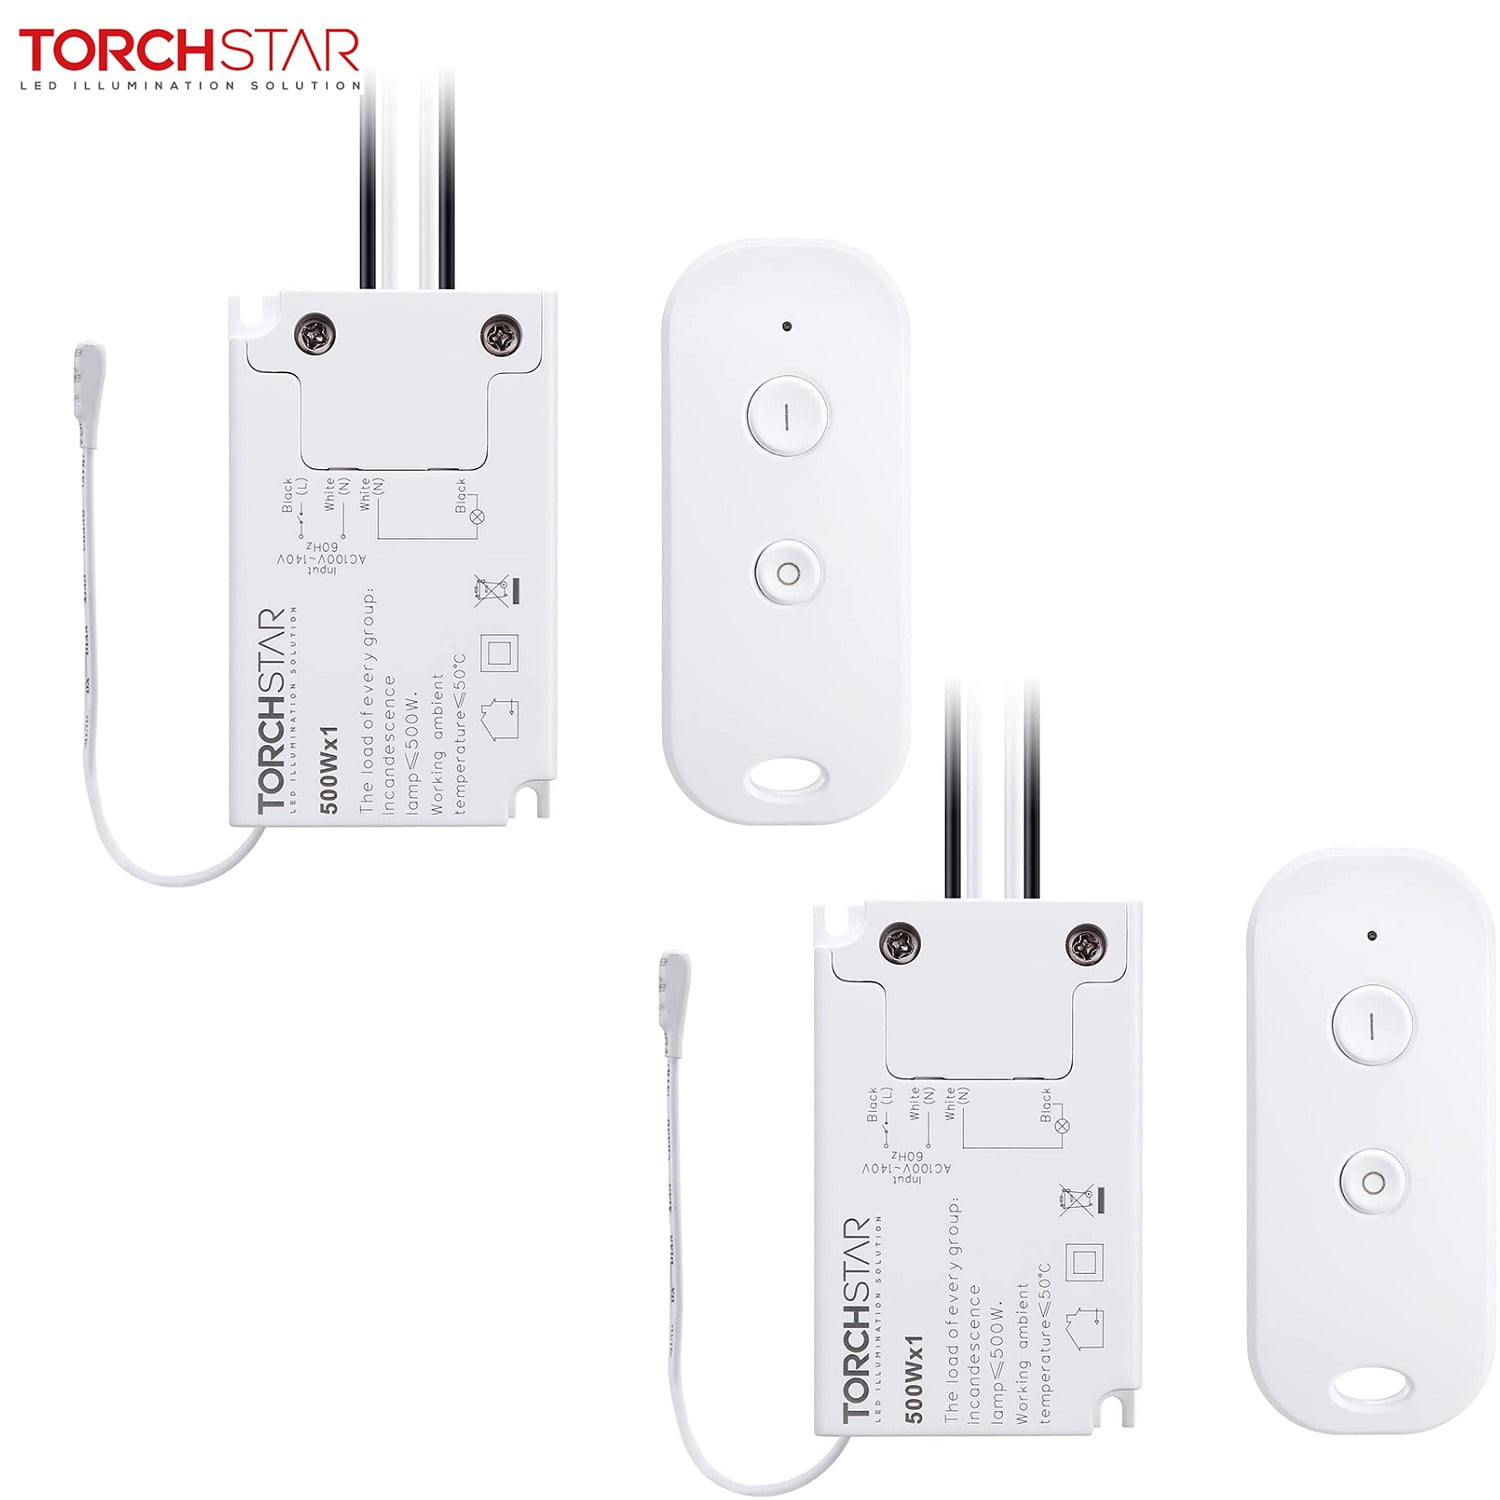 TORCHSTAR Wireless Light Switch and Receiver Kit, Simple Remote Control, On/Off No Wire Switch for Tungsten, Incandescent, Filament, LED Lights, Lamps